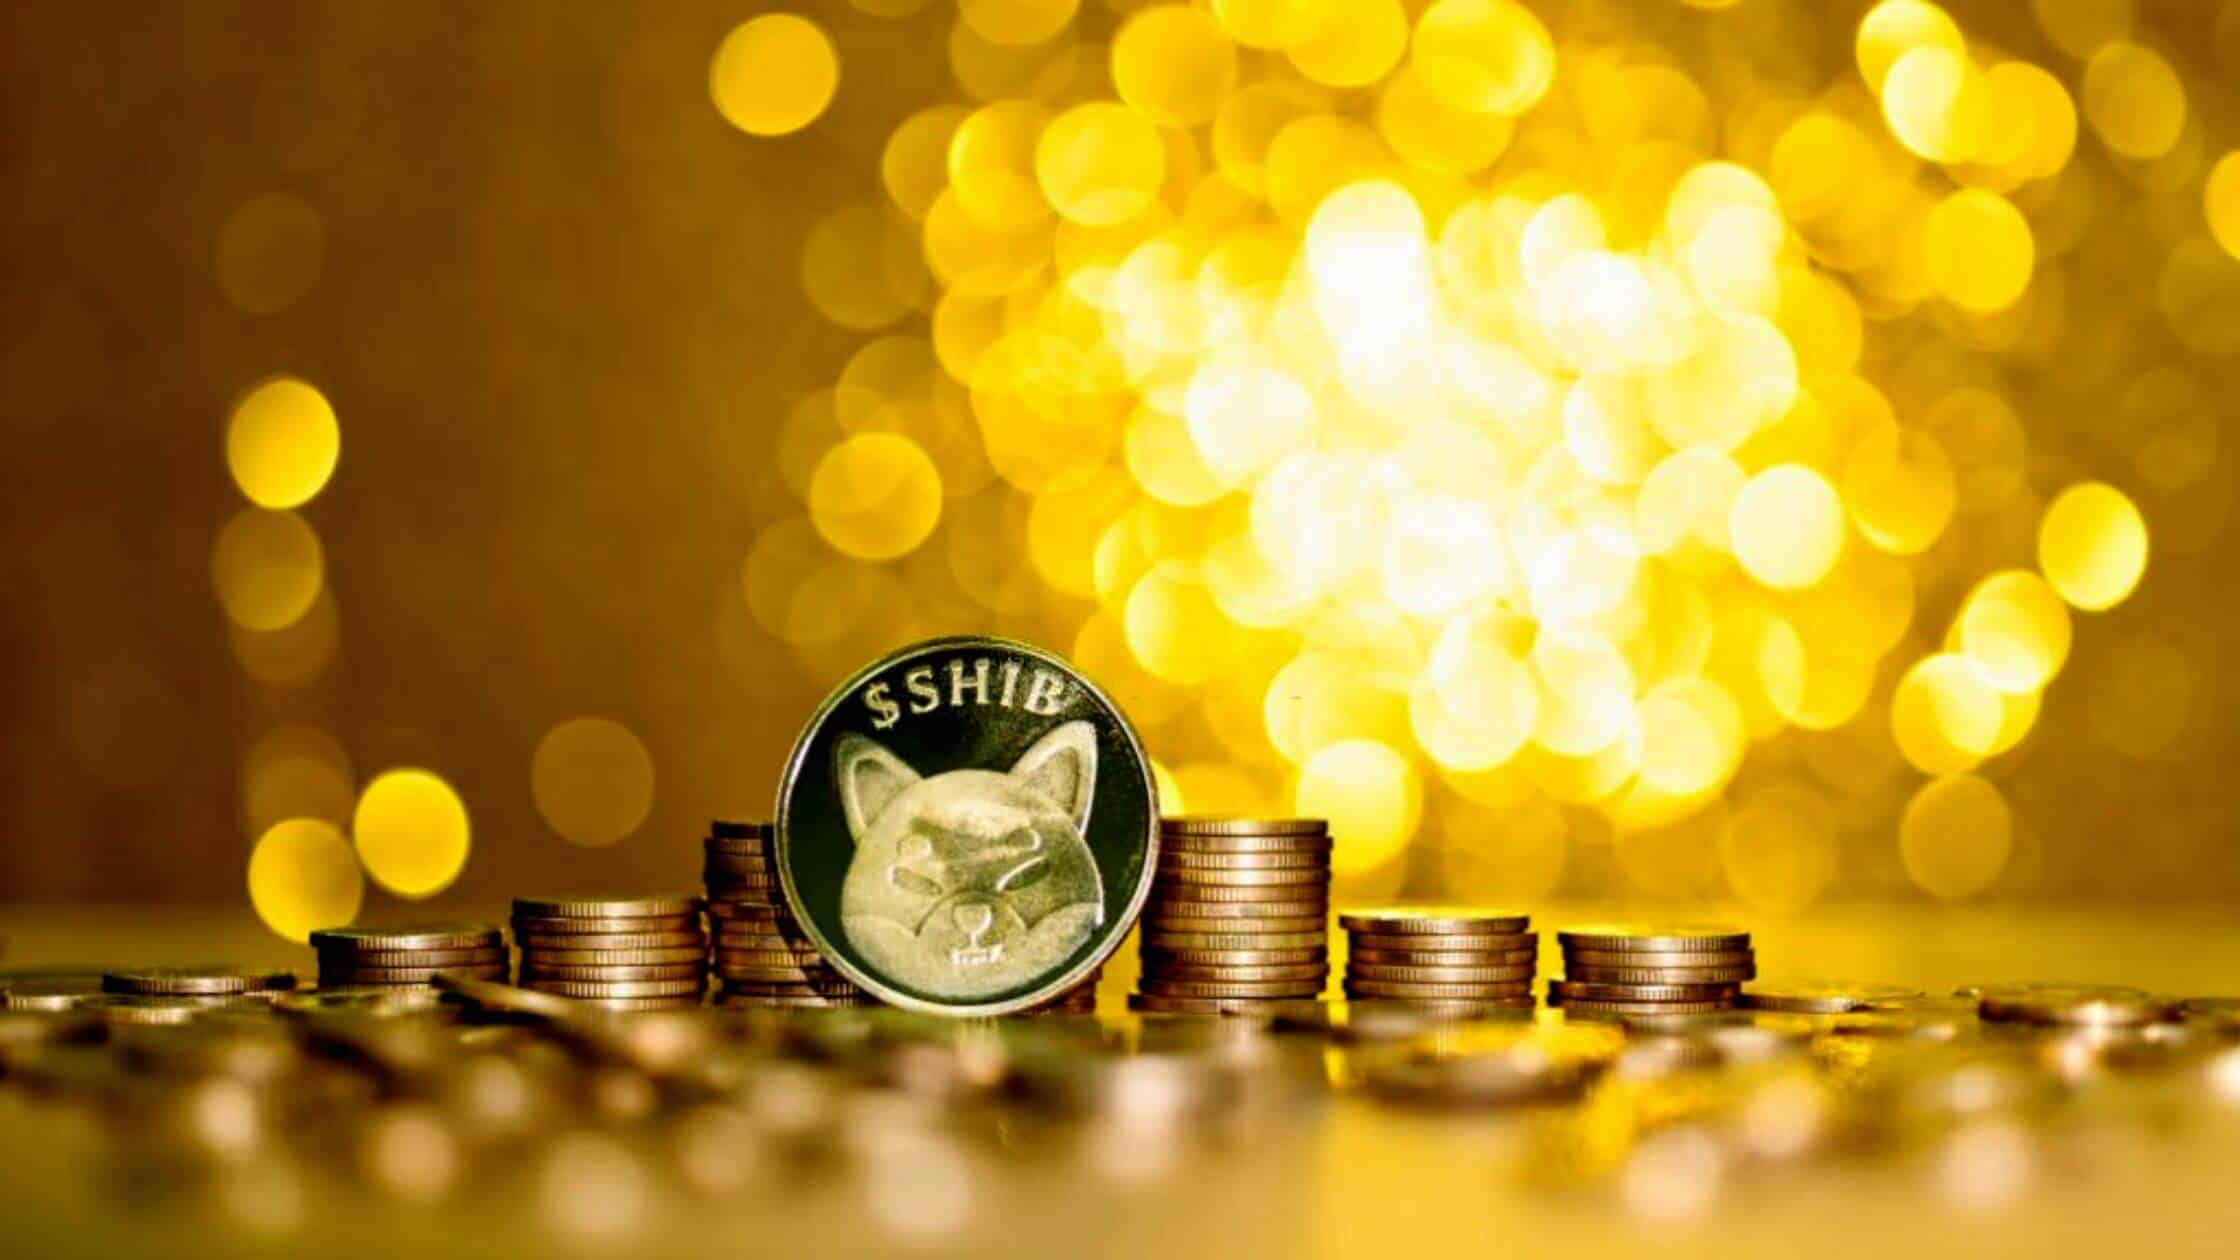 All About Shiba Inu Coin